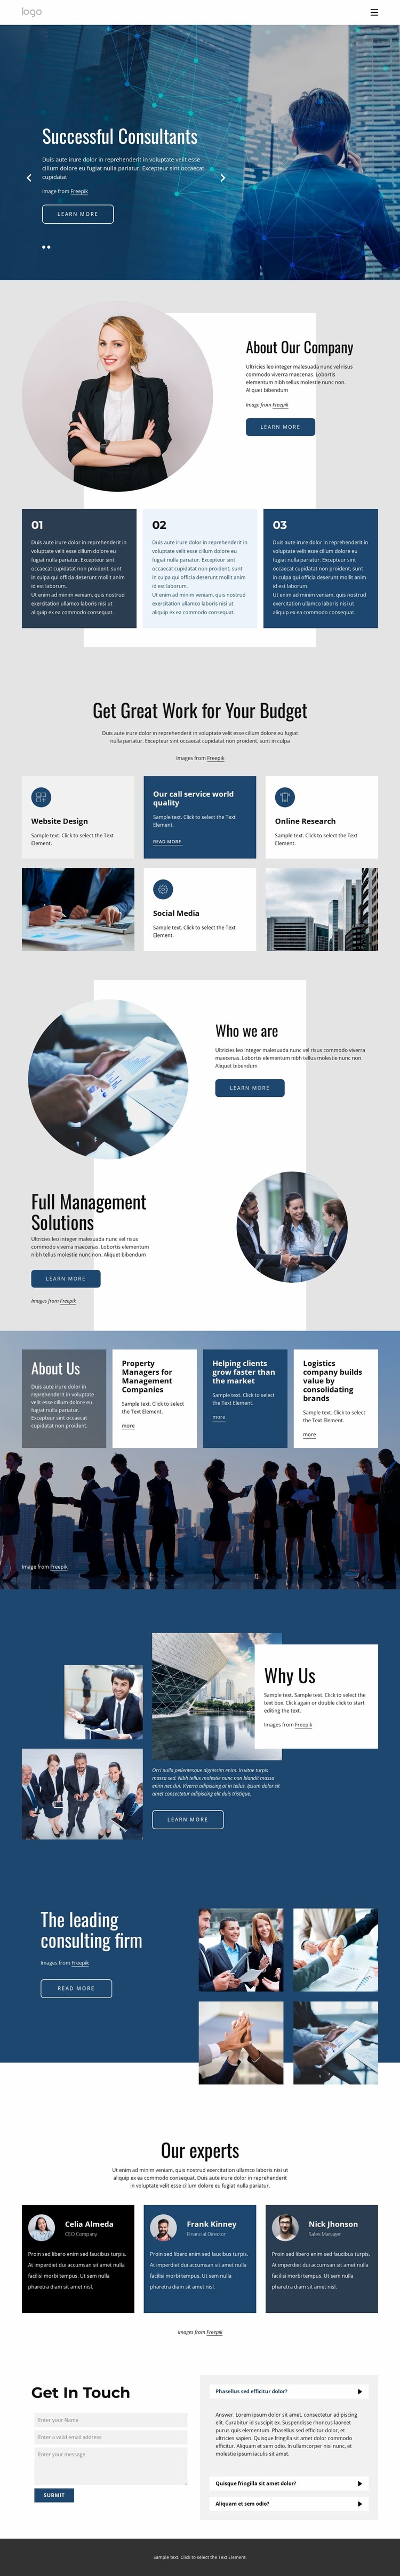 We offer tailored consulting services Website Mockup